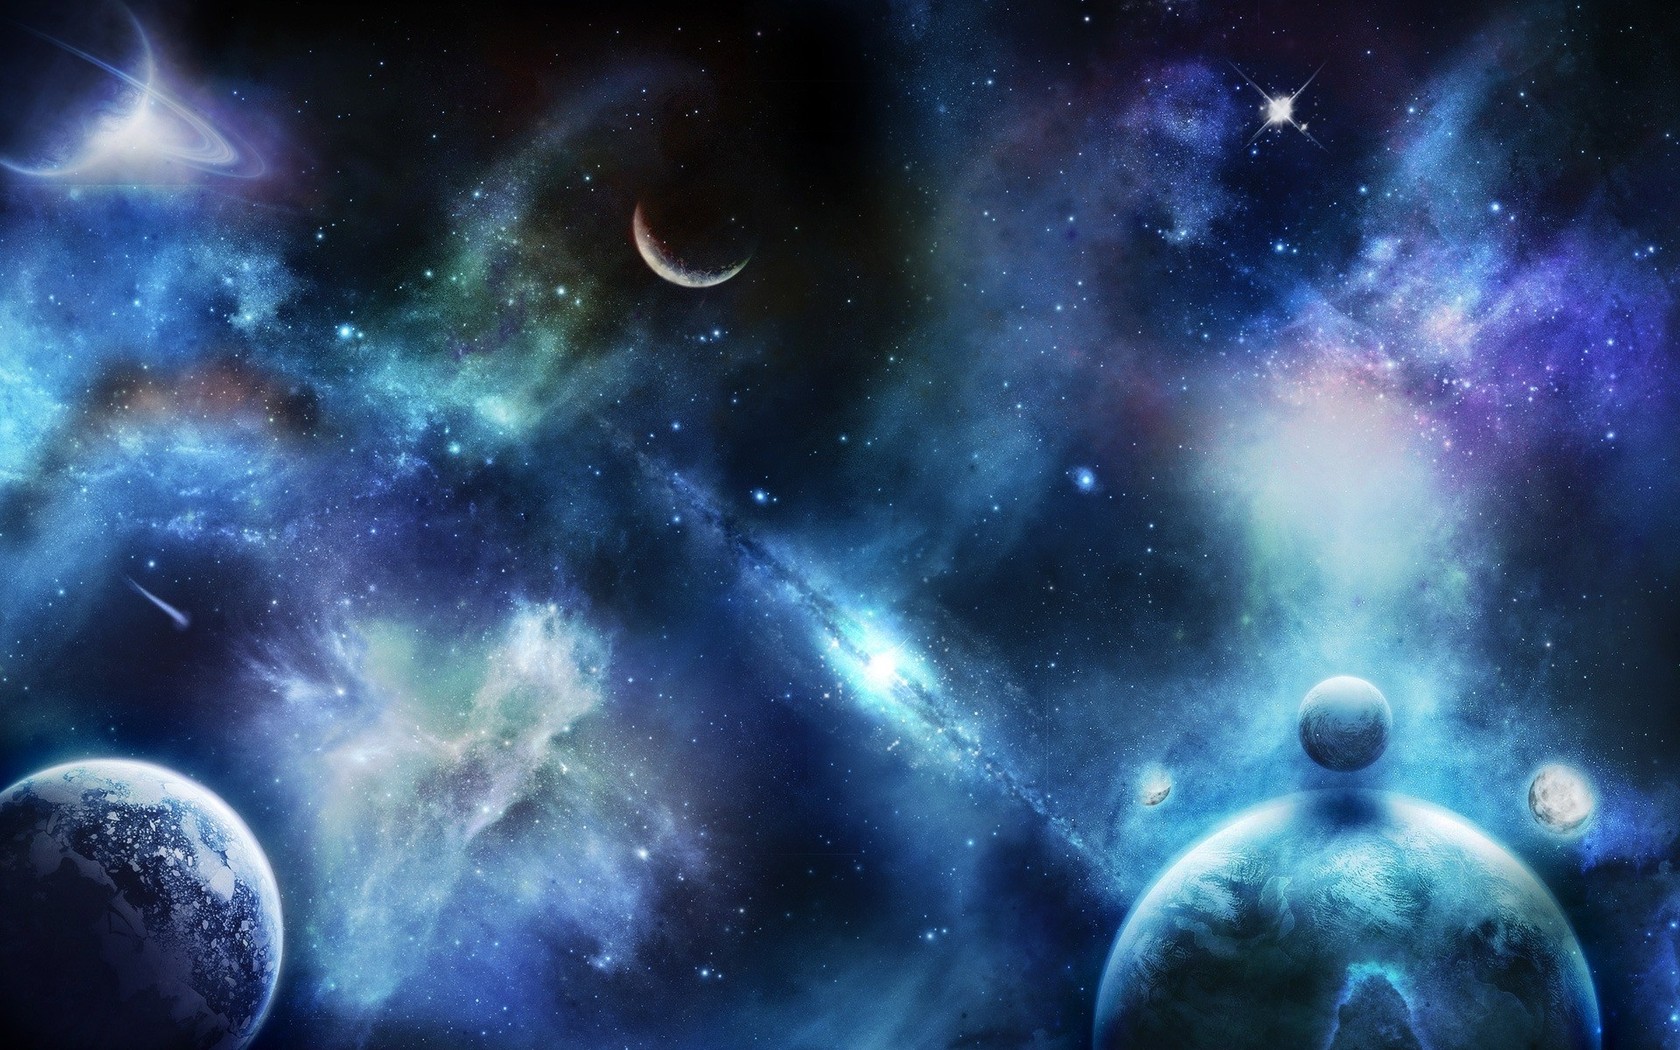 universe wallpaper,outer space,universe,astronomical object,sky,blue